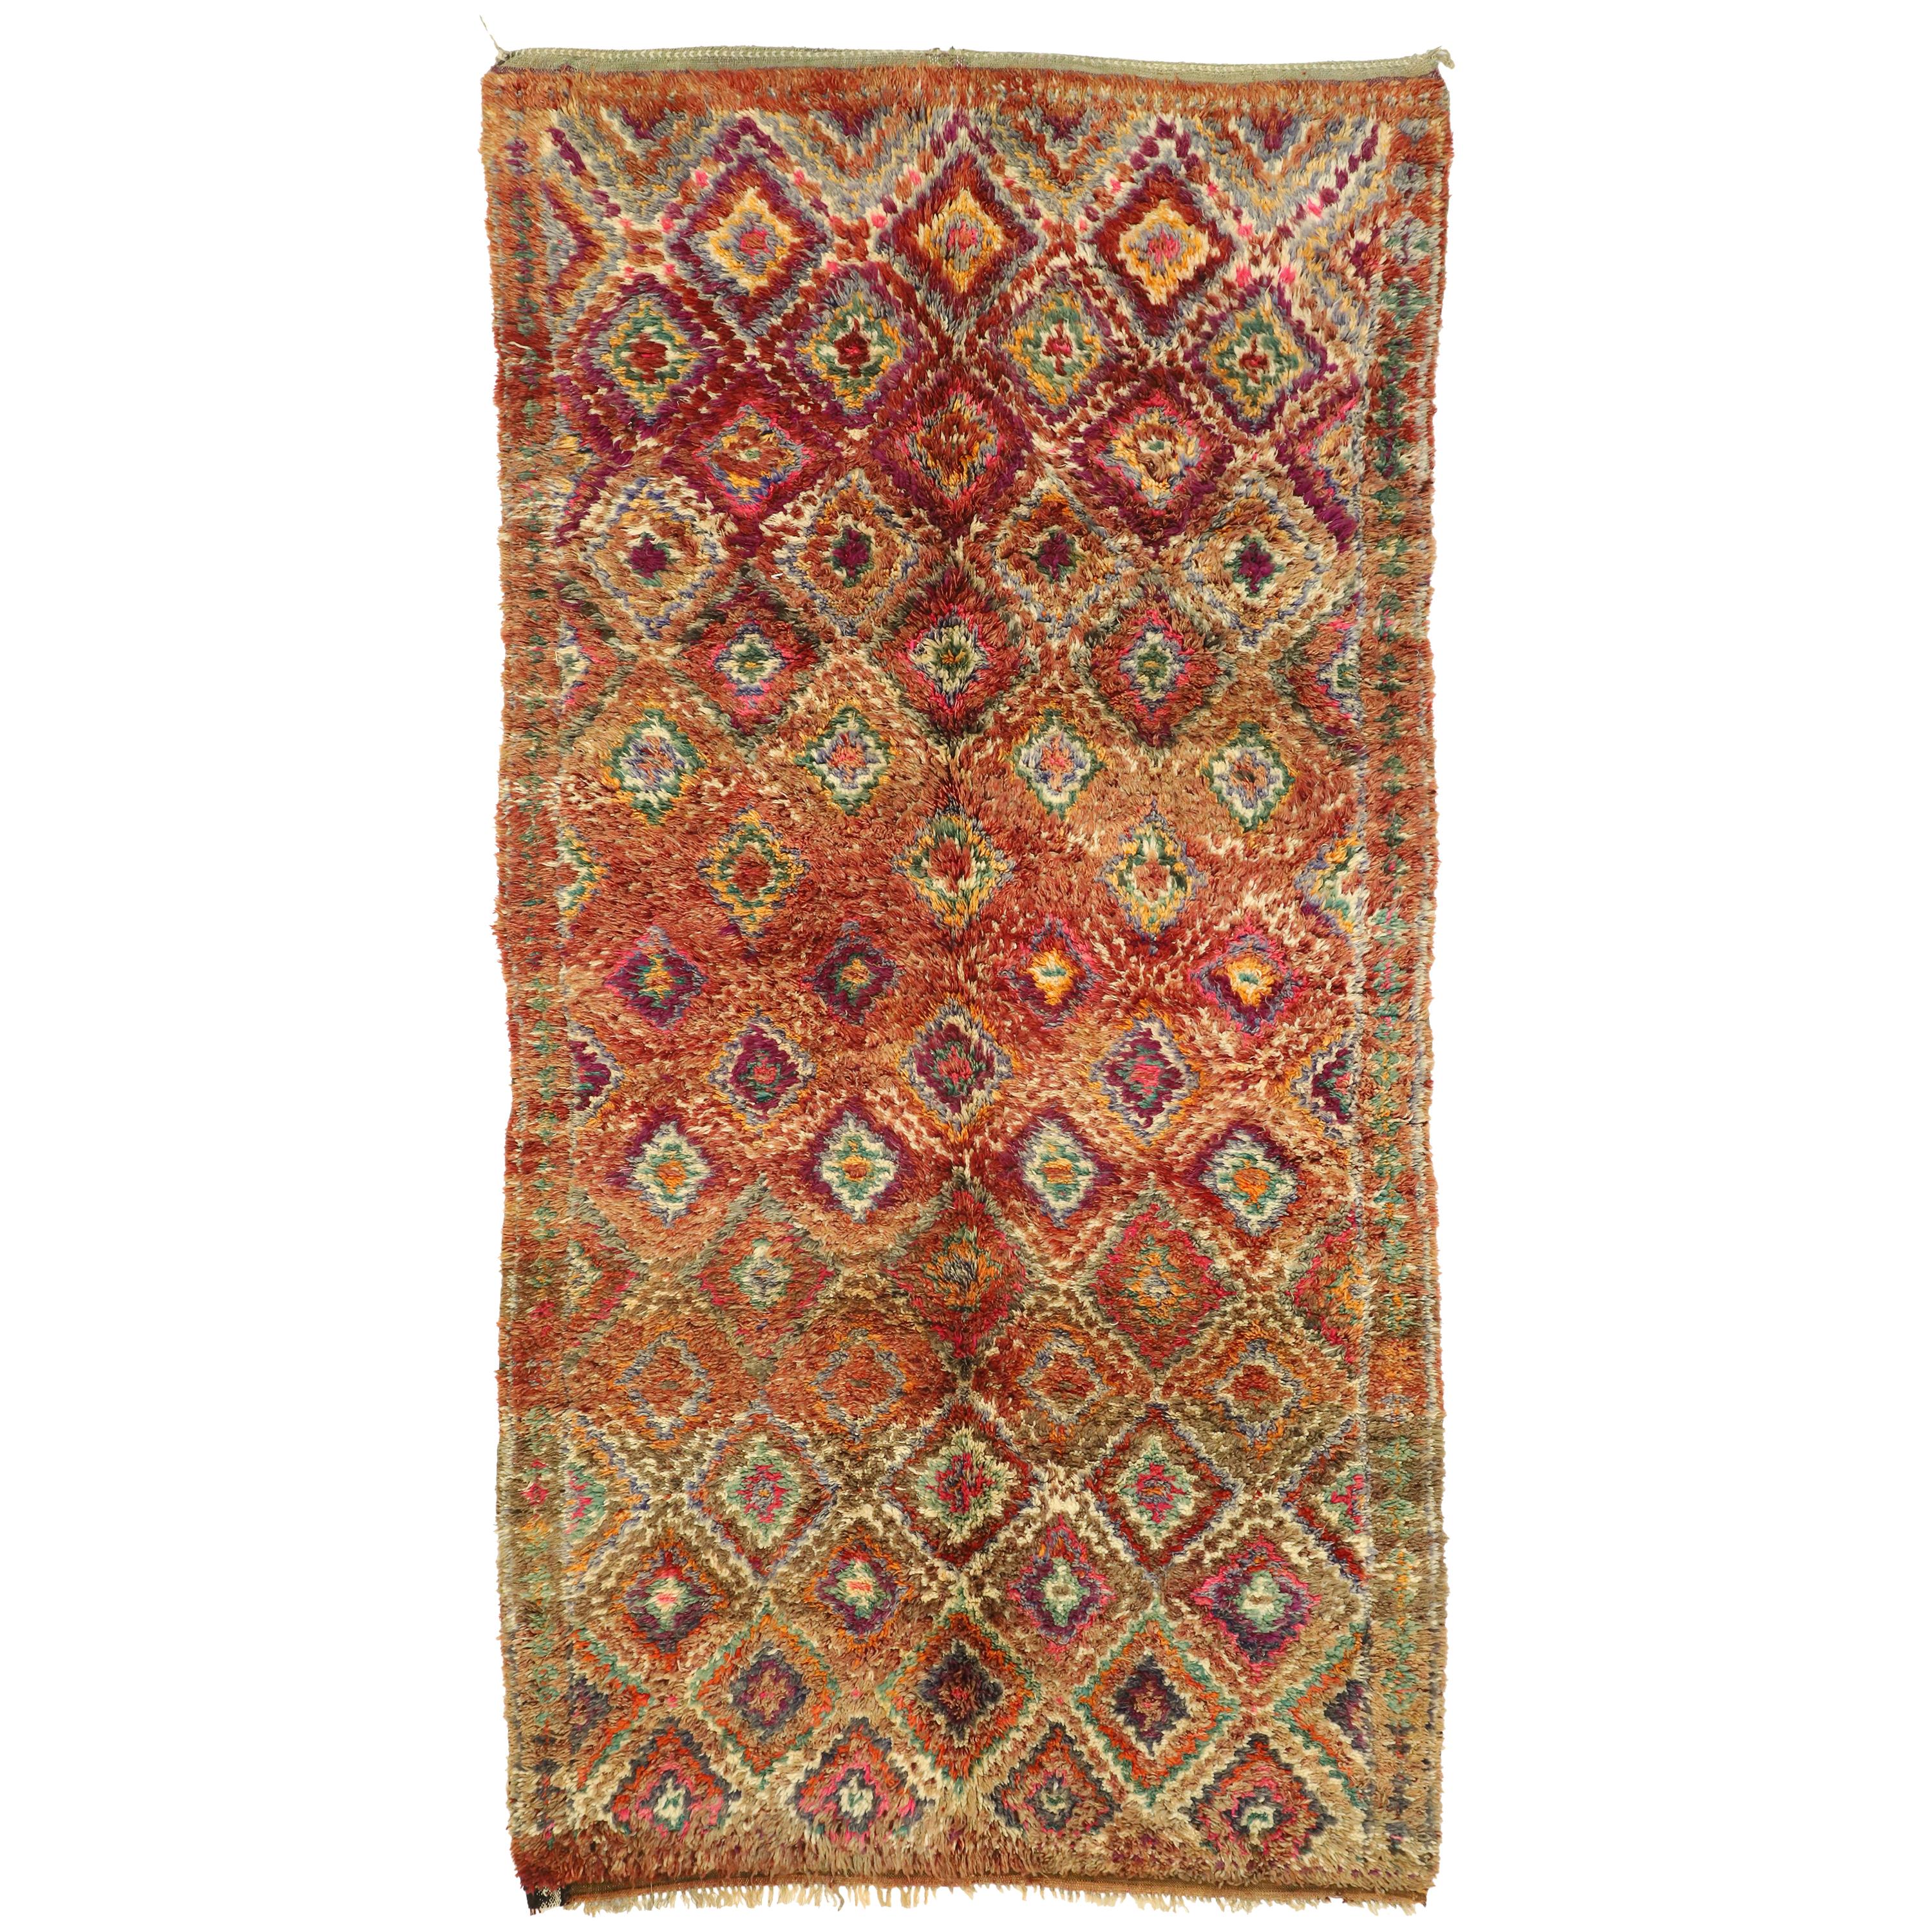 Vintage Taznakht Moroccan Rug with Diamond Pattern and Mid-Century Modern Style